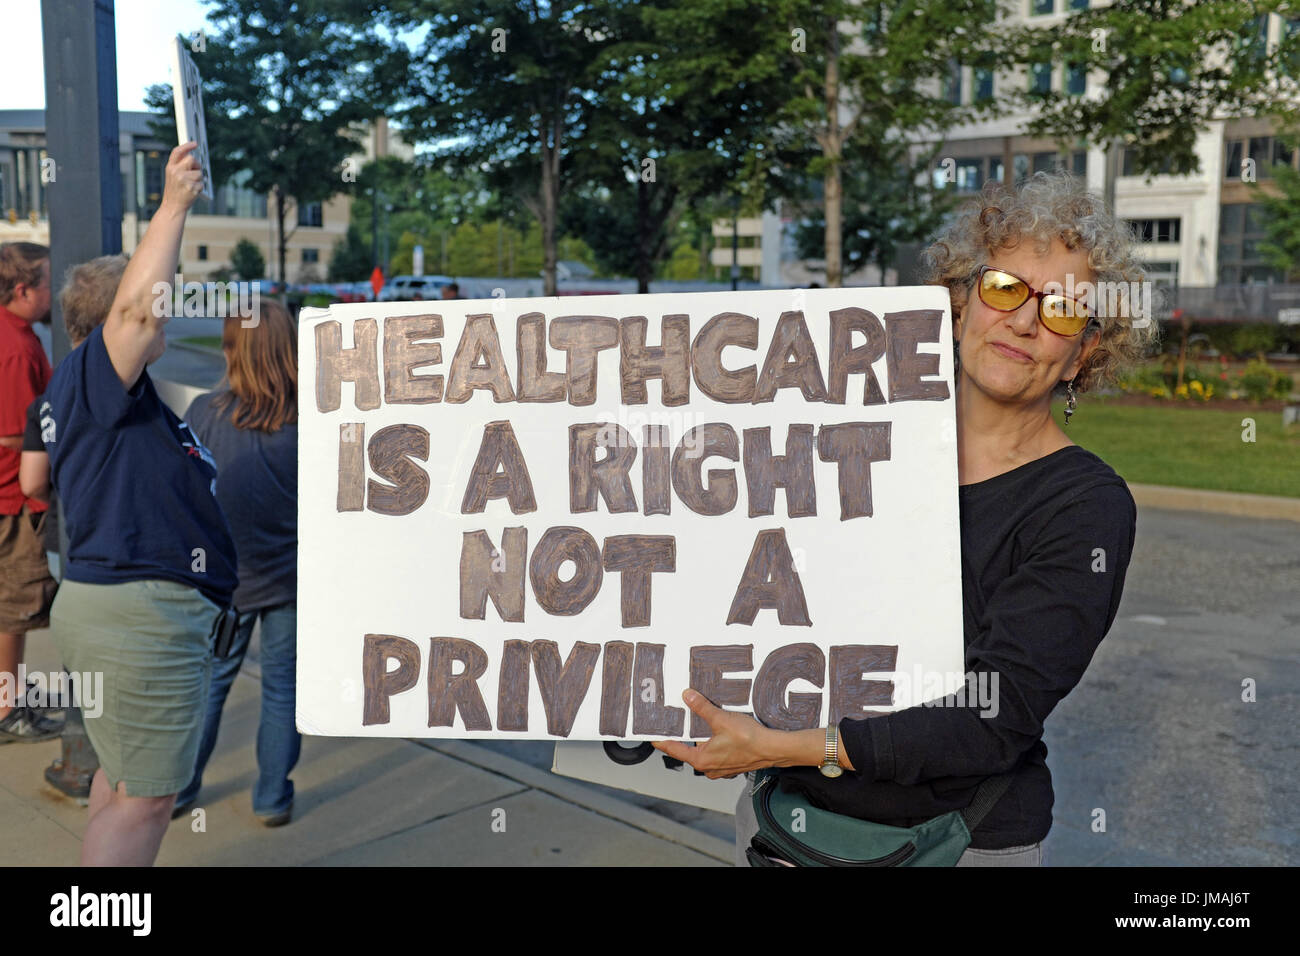 Youngstown, Ohio, USA. 25th July, 2017. Protesters demonstrate against Trumpcare on the streets of Youngstown, Ohio, USA, during a political rally by President Donald Trump Credit: Mark Kanning/Alamy Live News Stock Photo